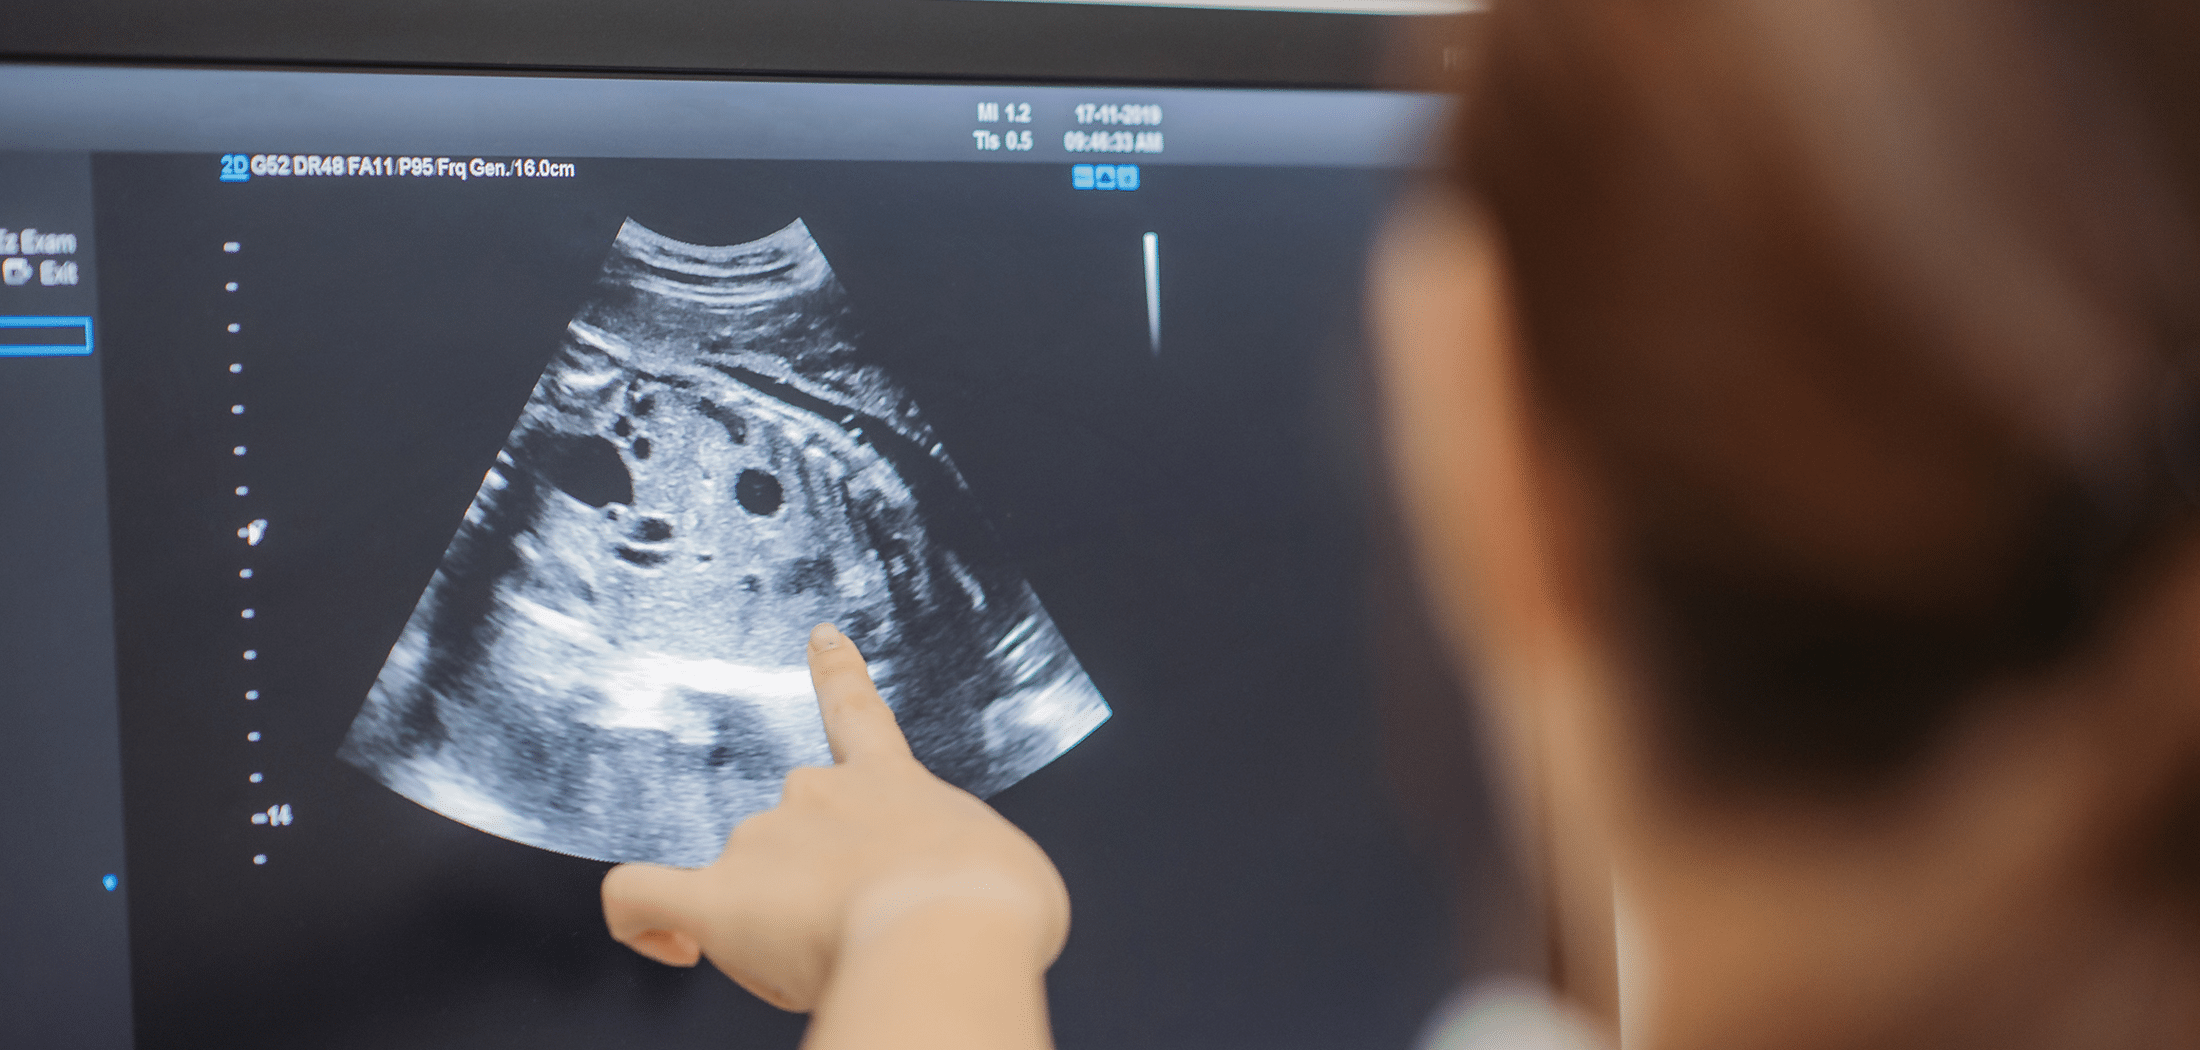 Pointing at an ultrasound